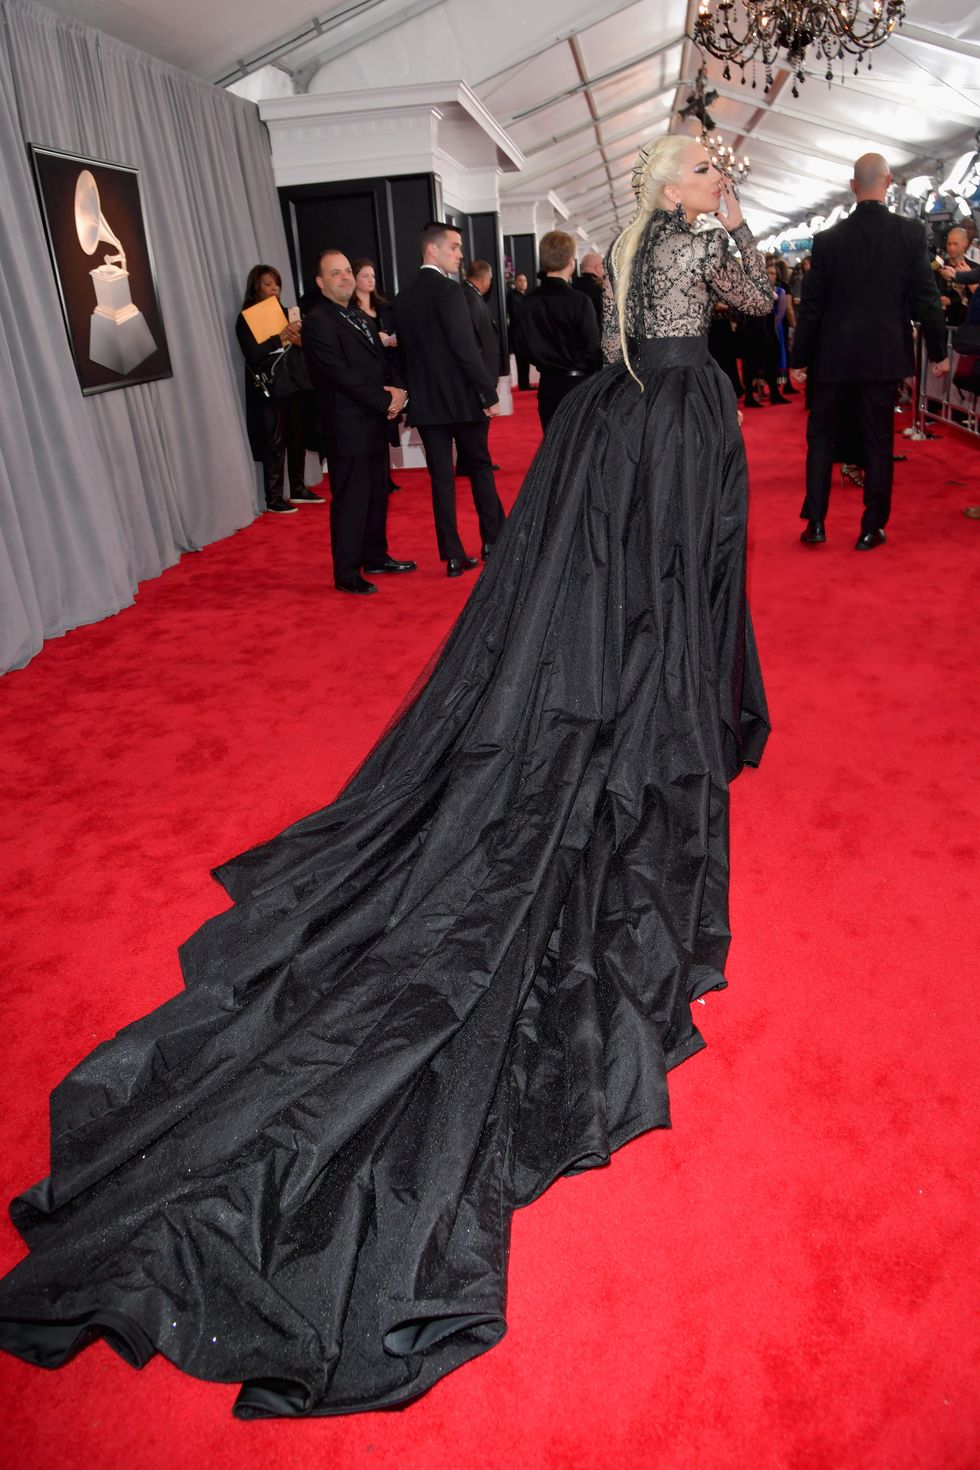 Lady Gaga Was Khaleesi of the Grammys in a Sheer Dress with a